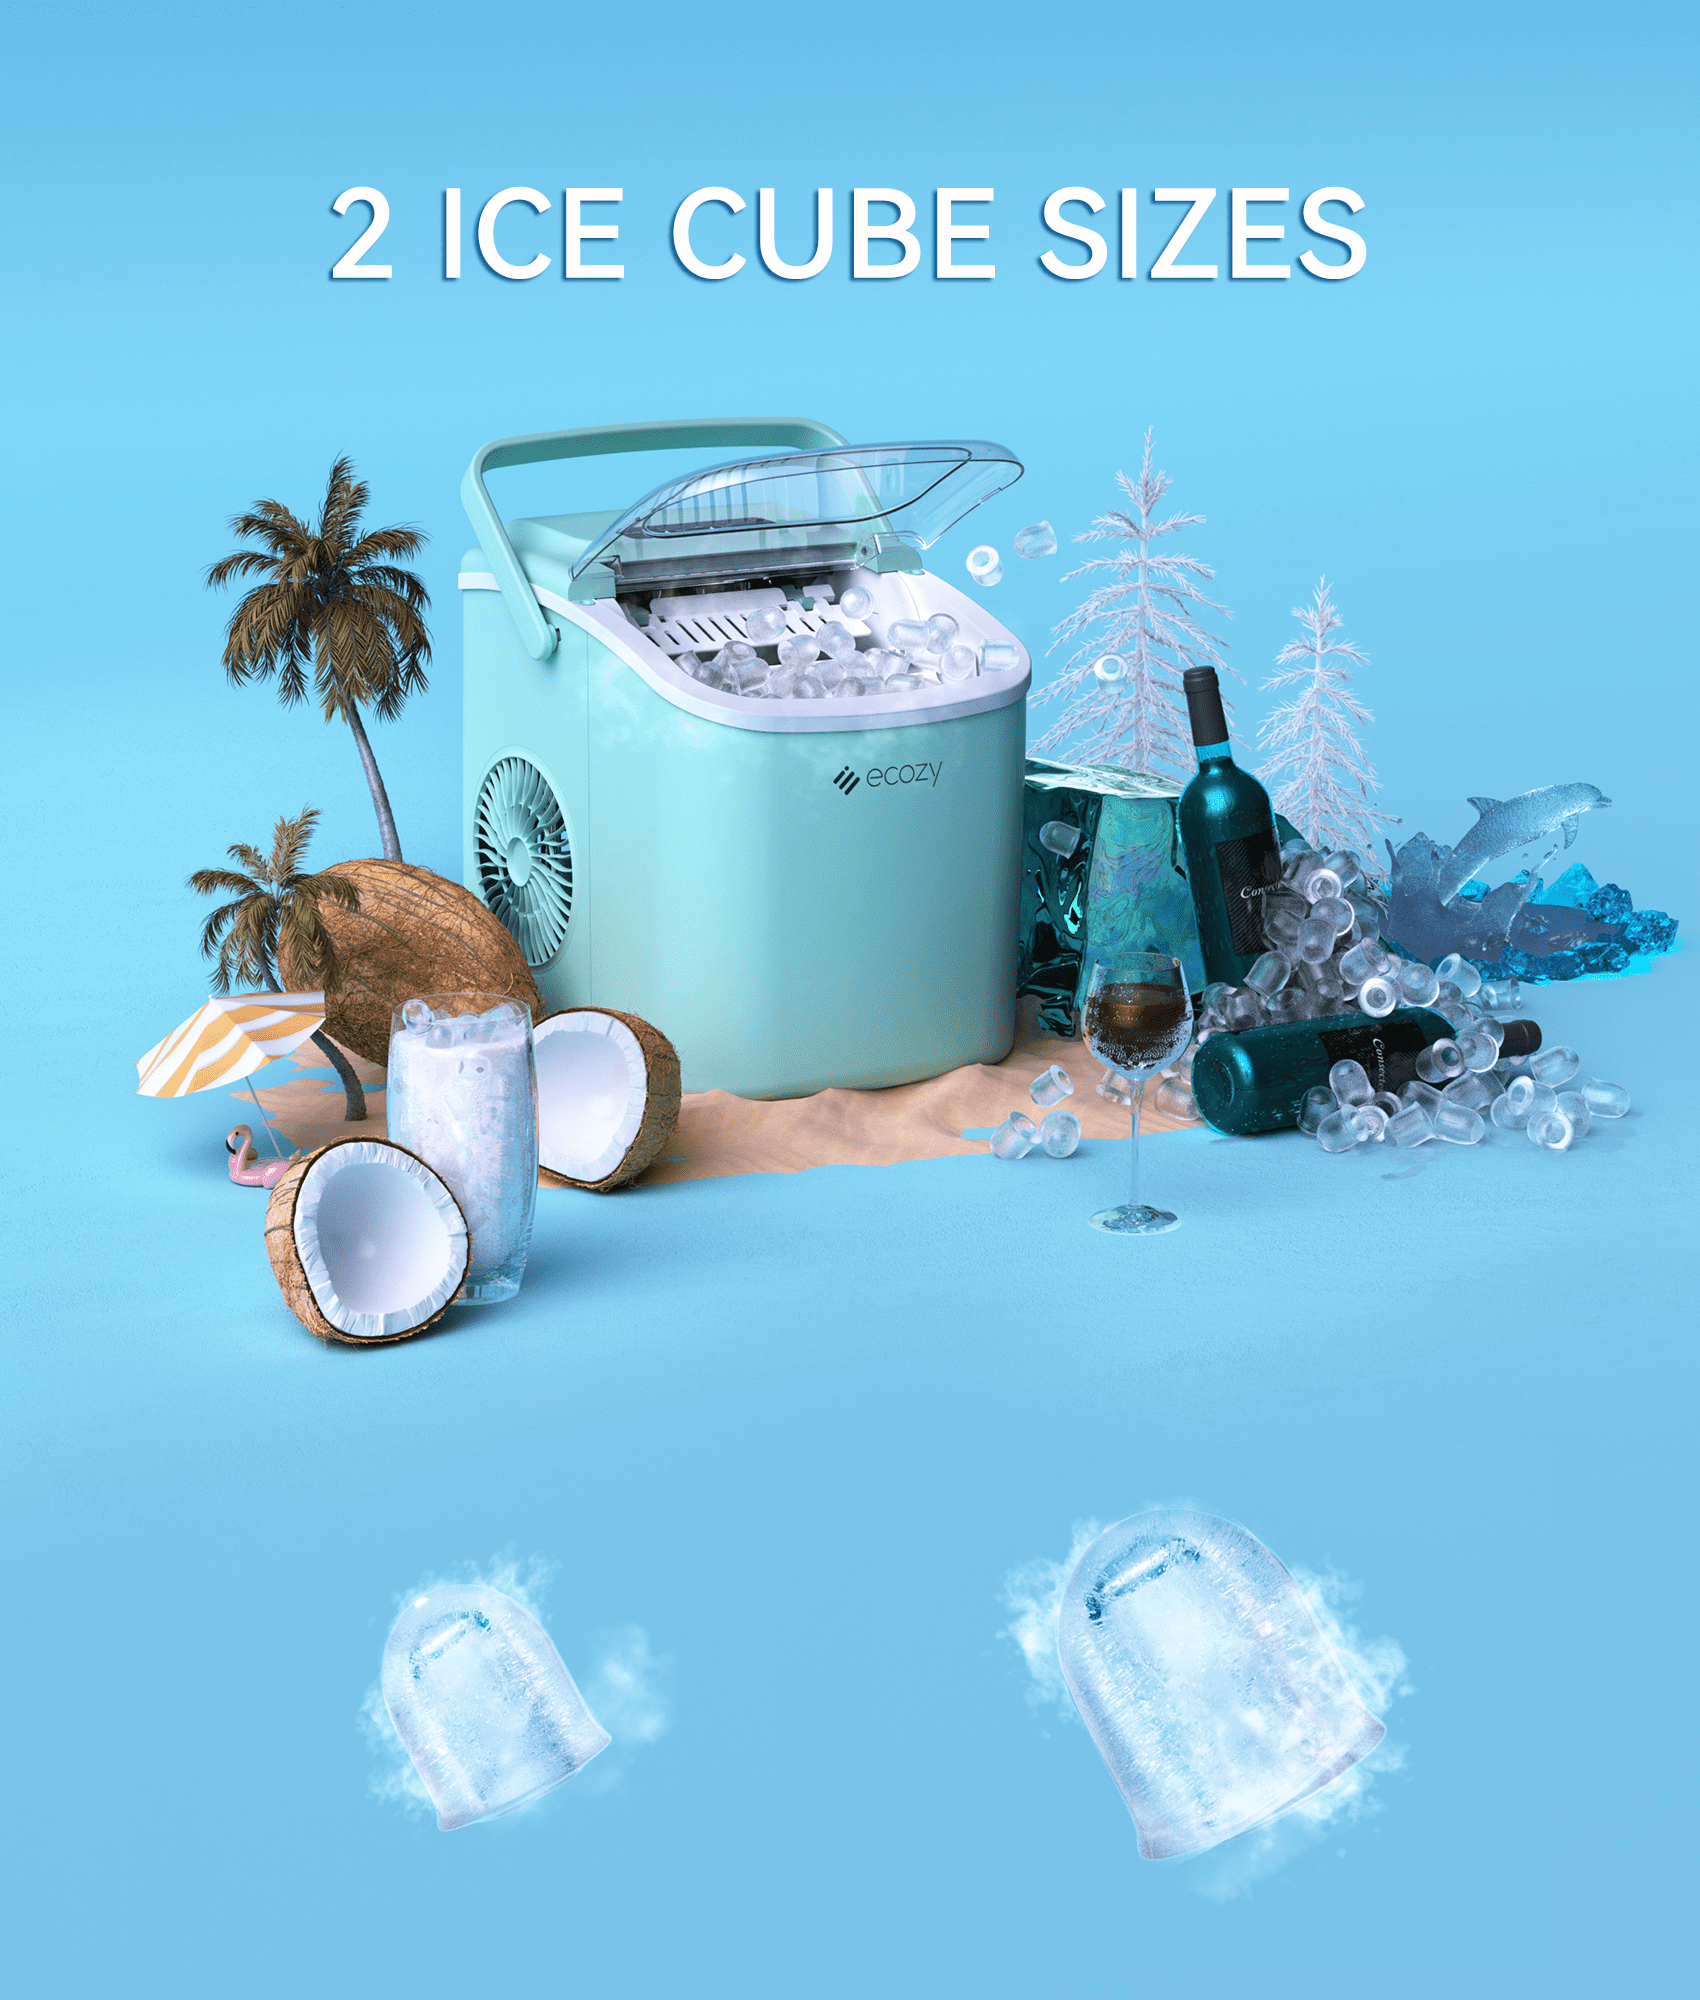 ecozy Ice Maker Countertop, 44lbs Per Day, 24 Cubes Ready in 13